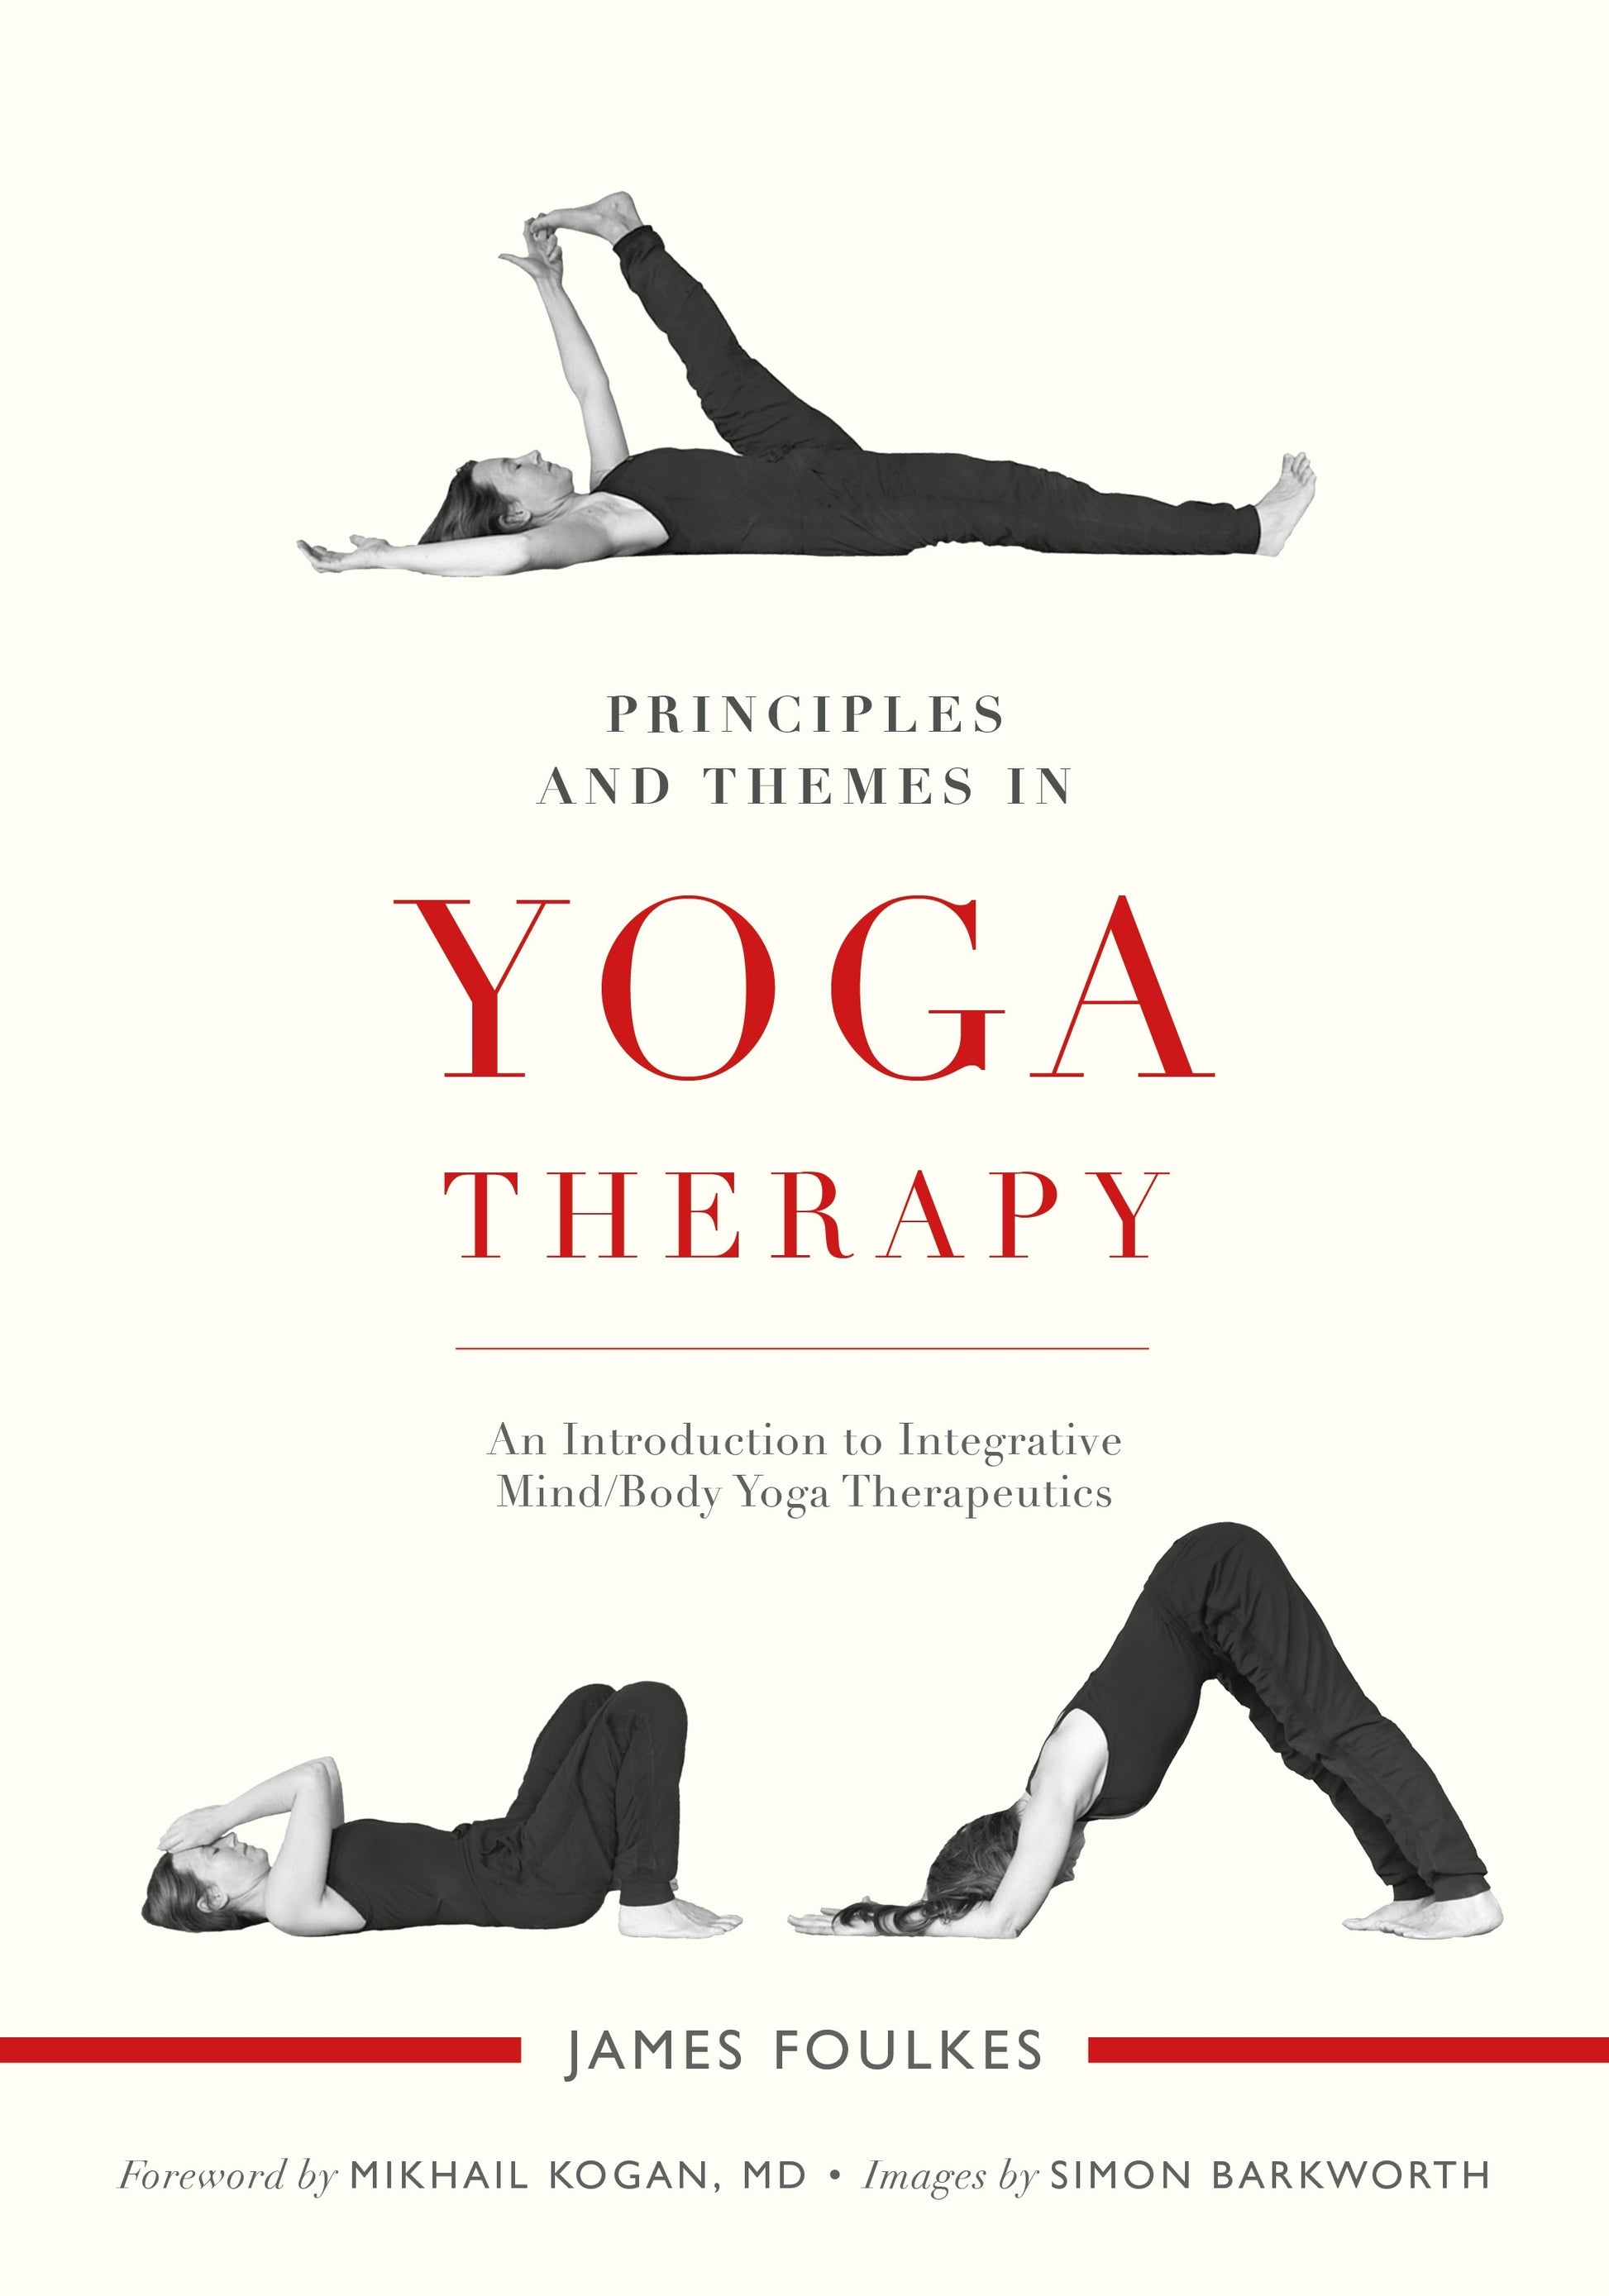 Principles and Themes in Yoga Therapy by Mikhail Kogan, James Foulkes